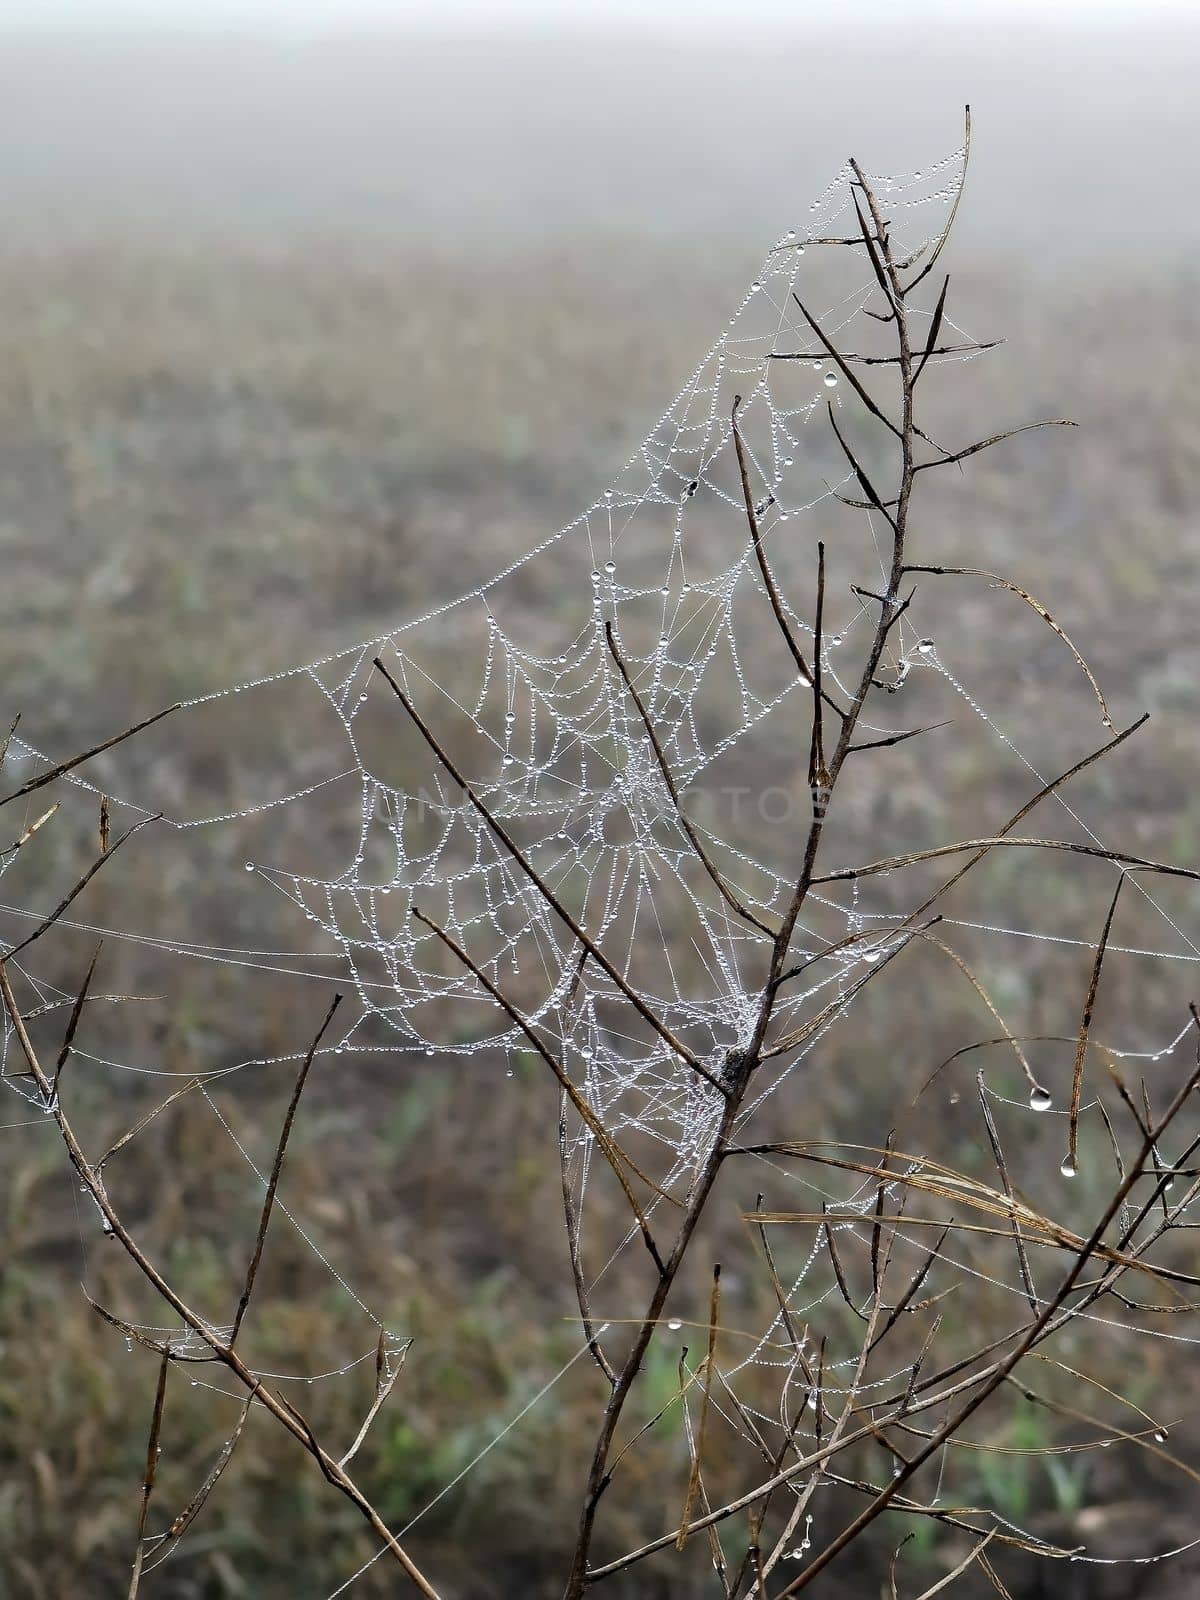 Beauty cobweb with raindrops on a plant in the field. Weather with fog by EdVal